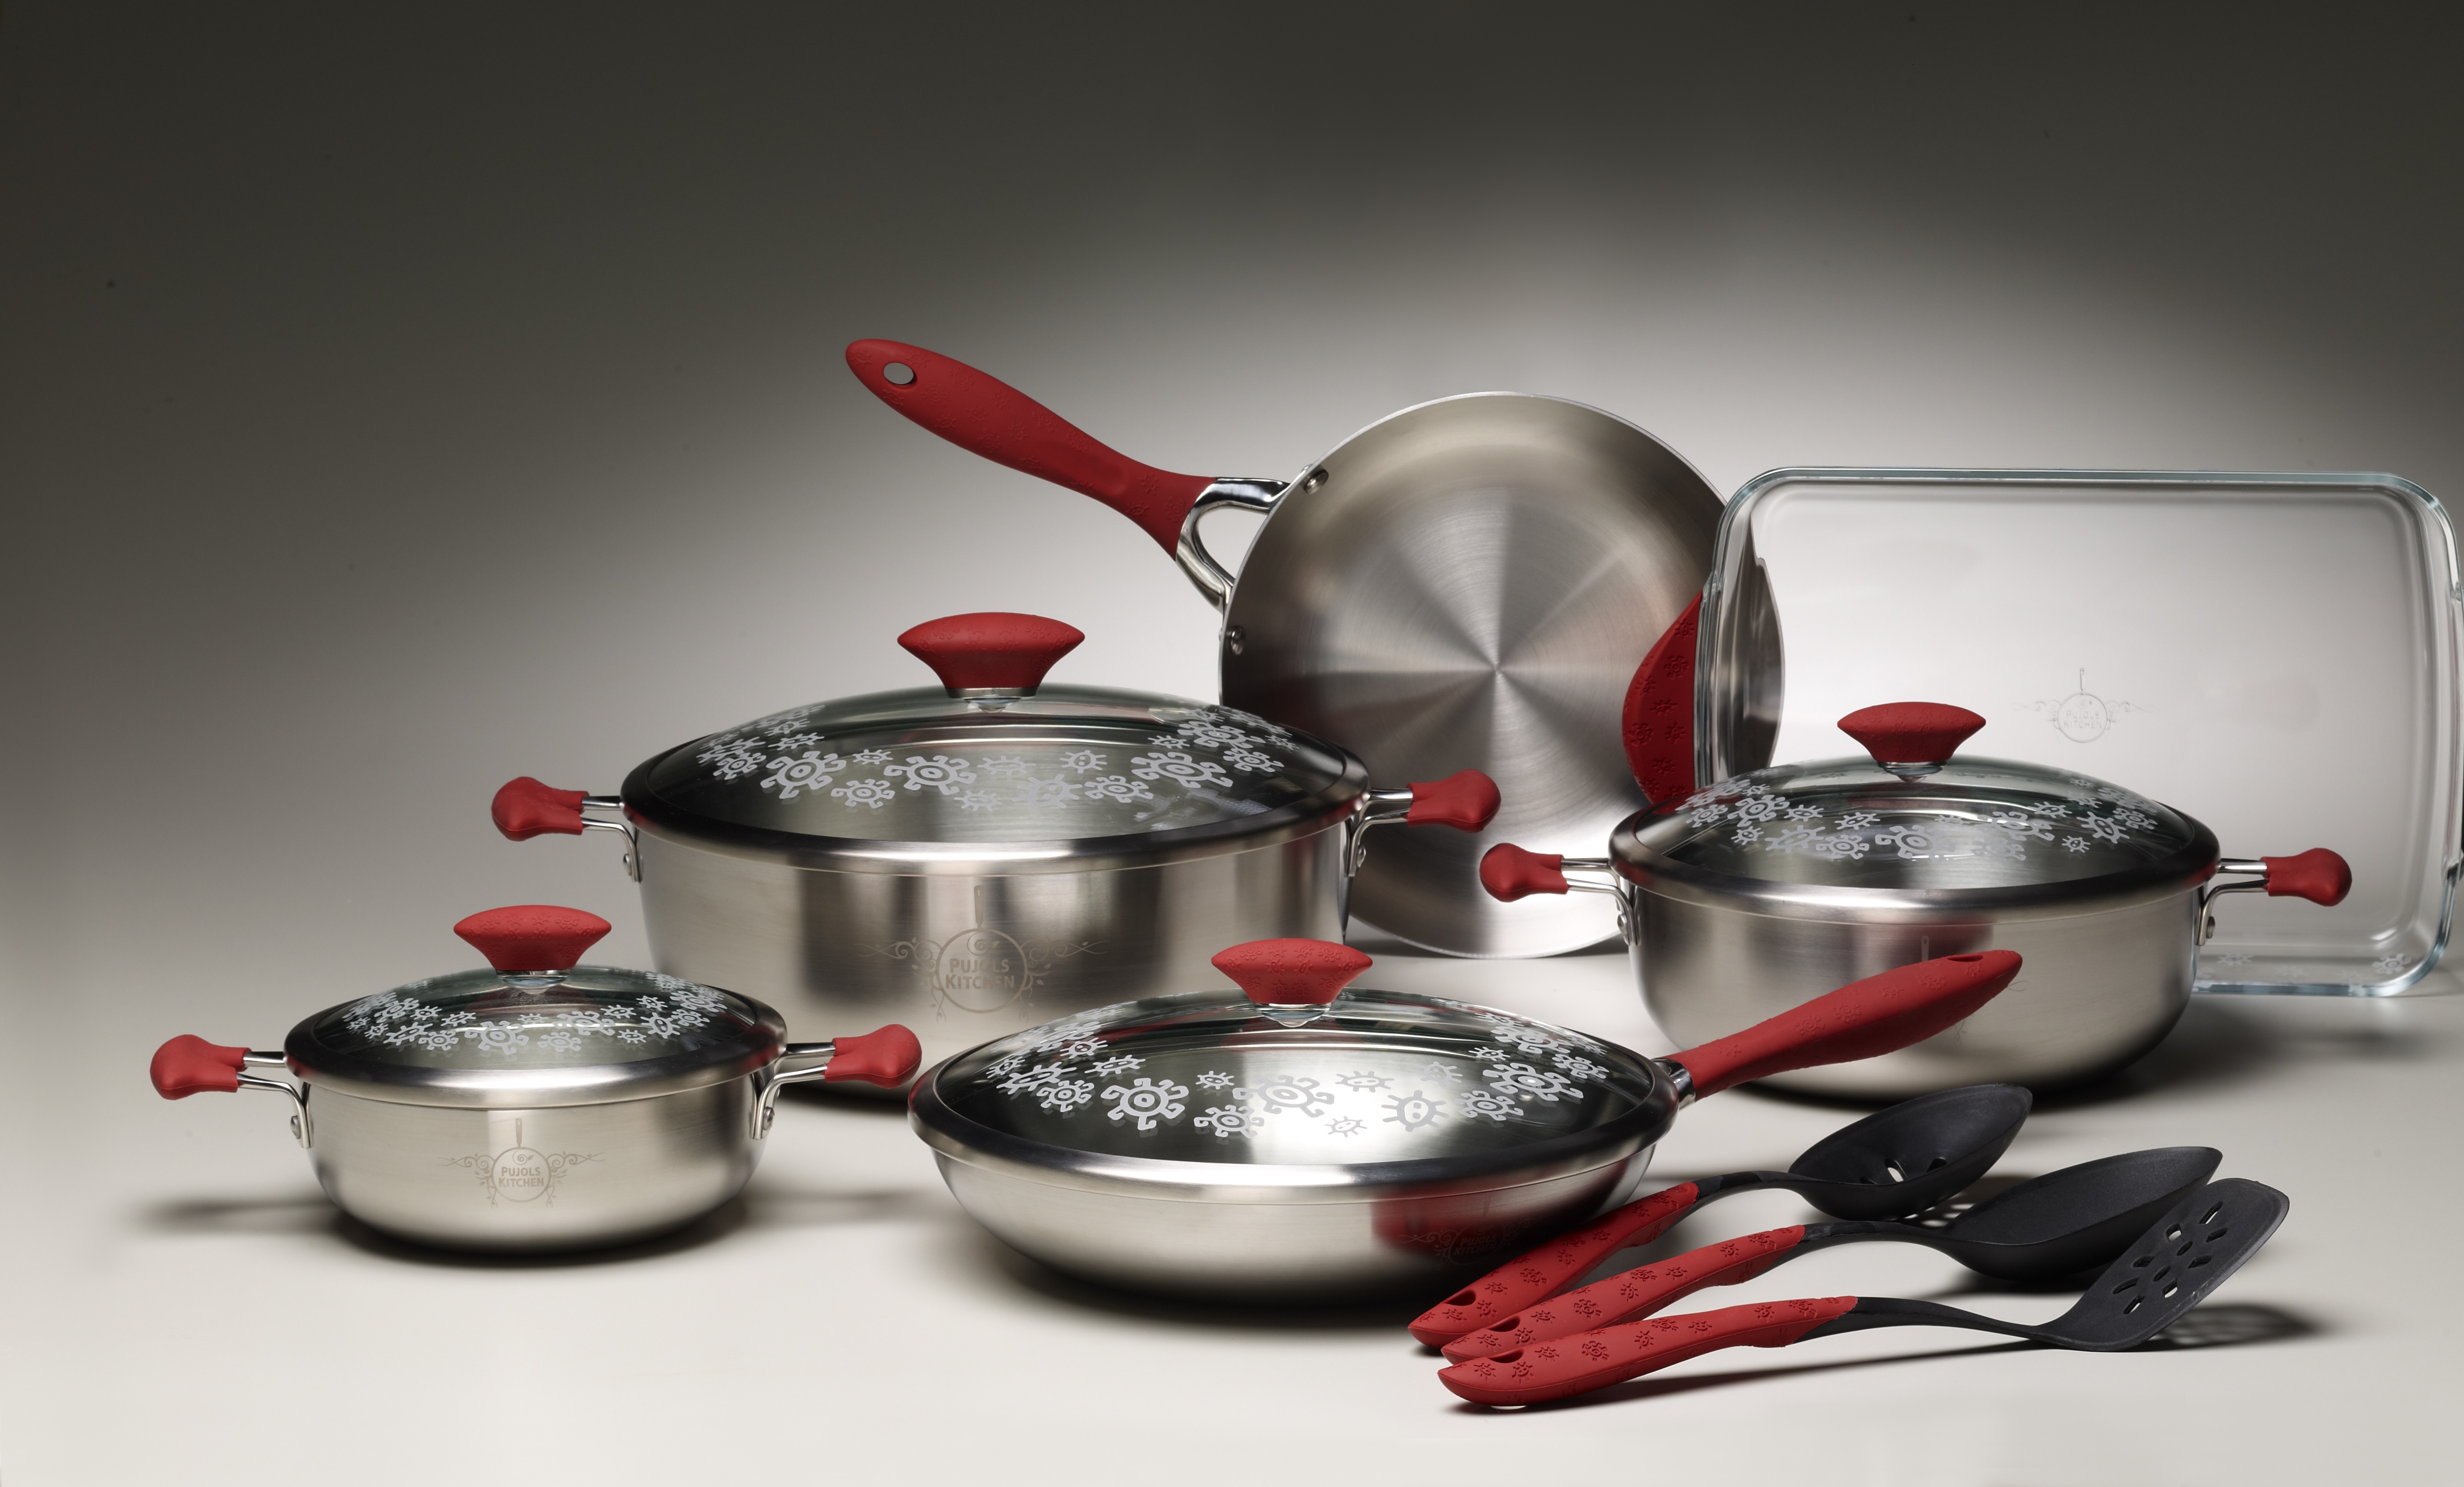 Introducing Pujols Kitchen Cookware: An innovative line of cookware inspired by the rich culture 